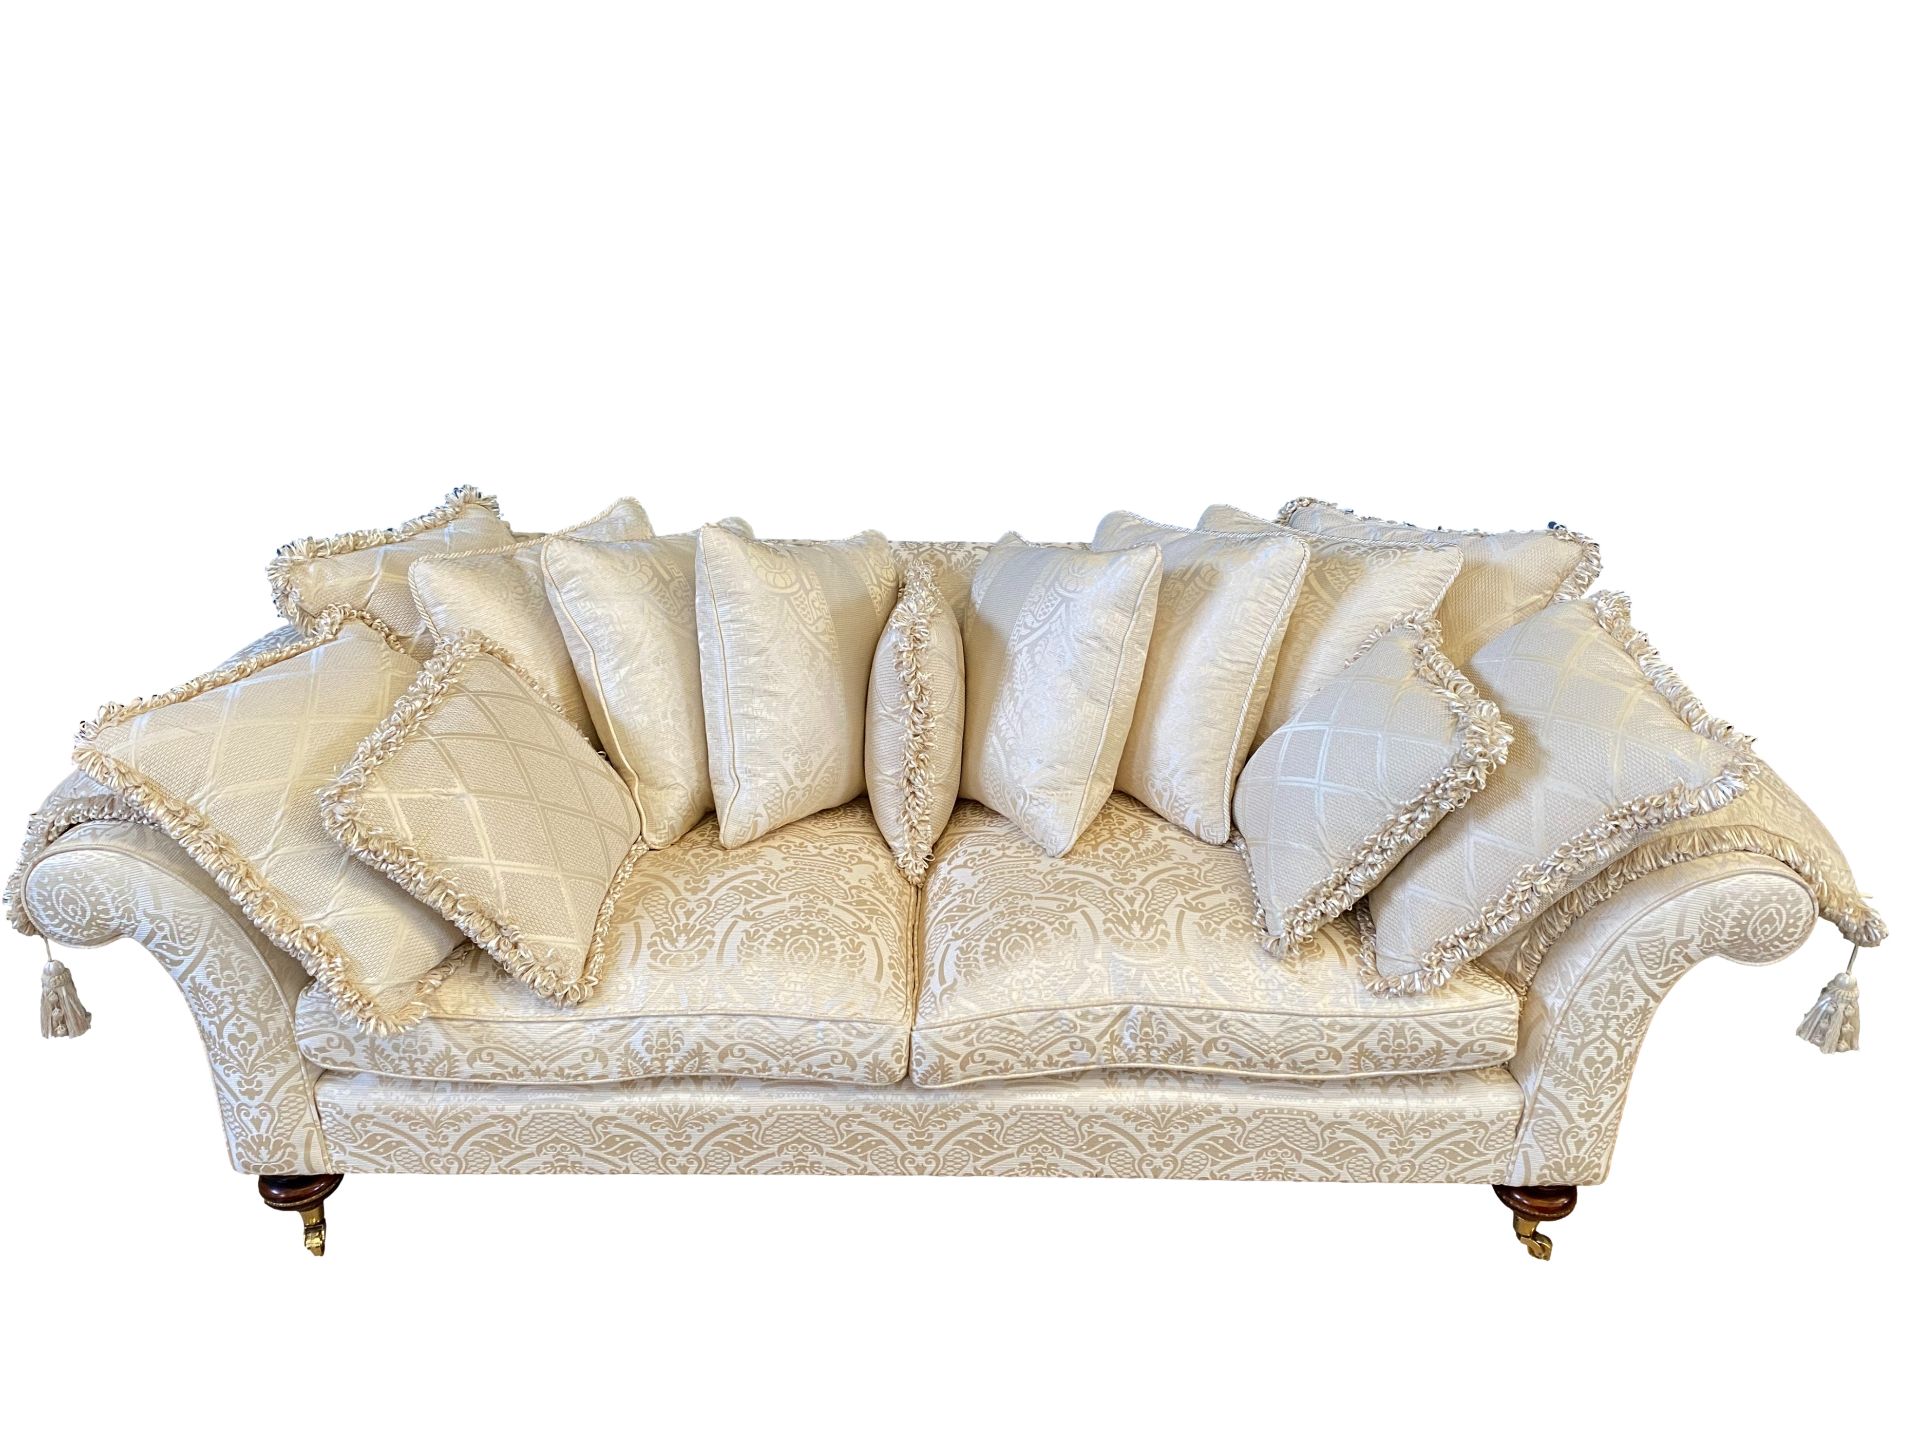 Contemporary scroll end sofa - Image 4 of 4